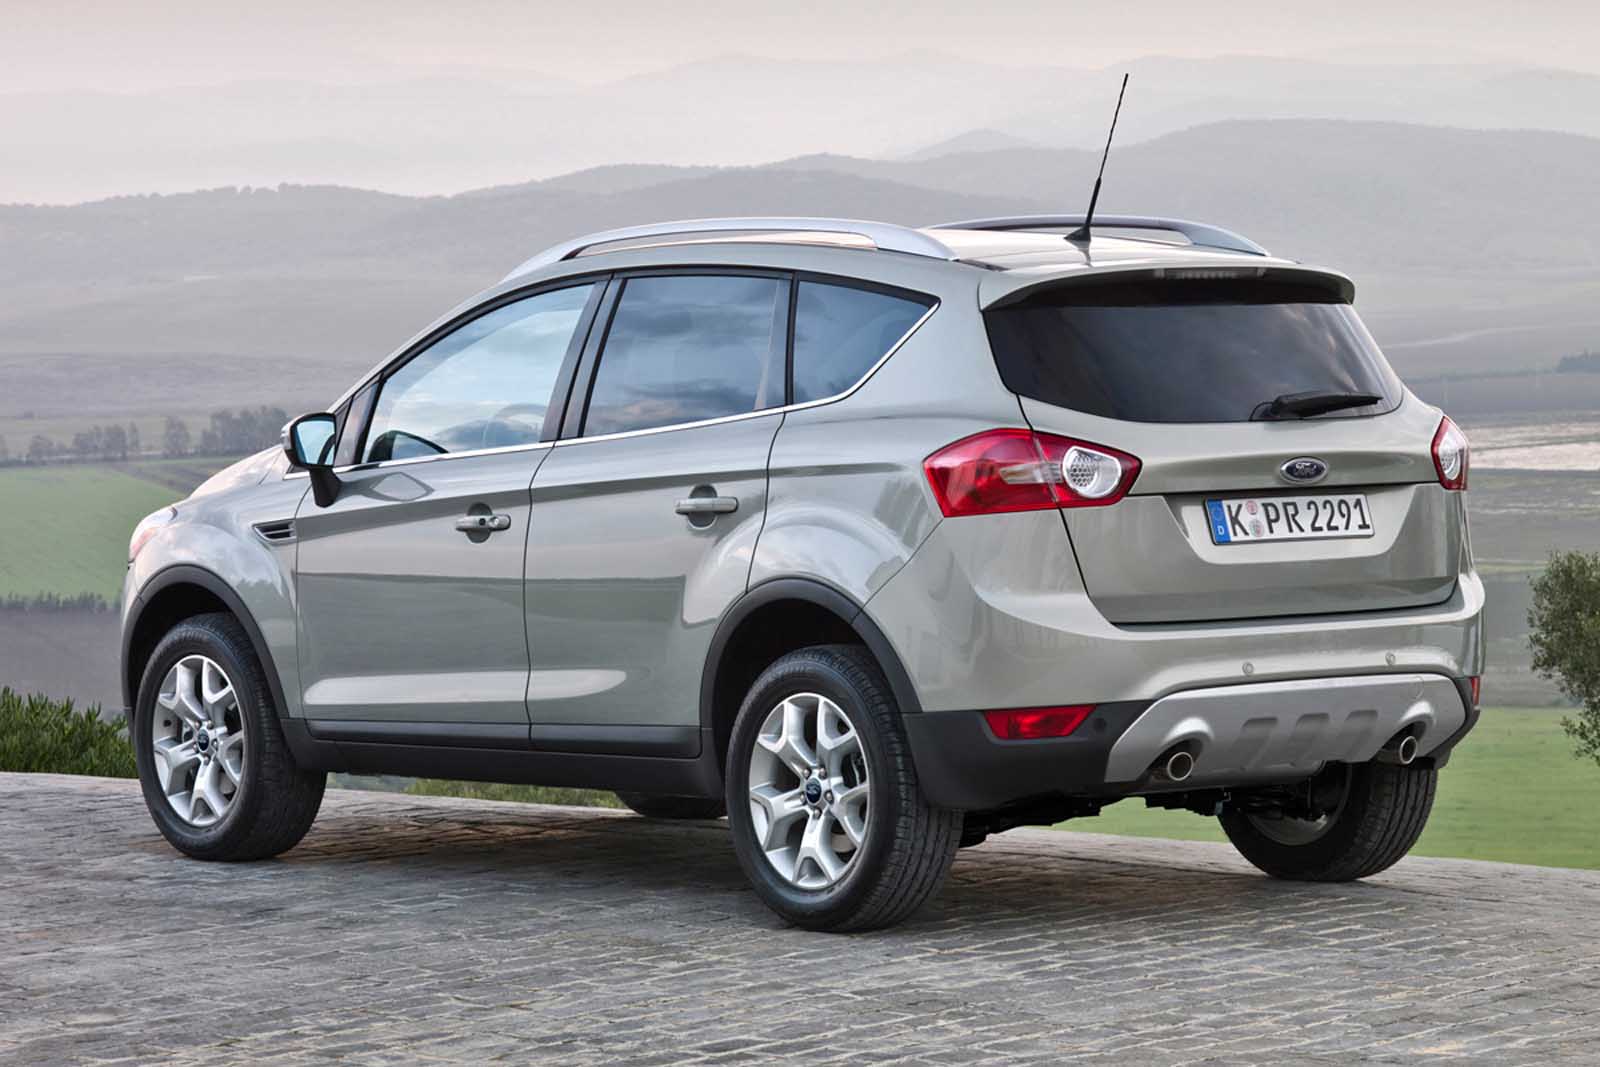 Ford Kuga 2.5 T technical details, history, photos on